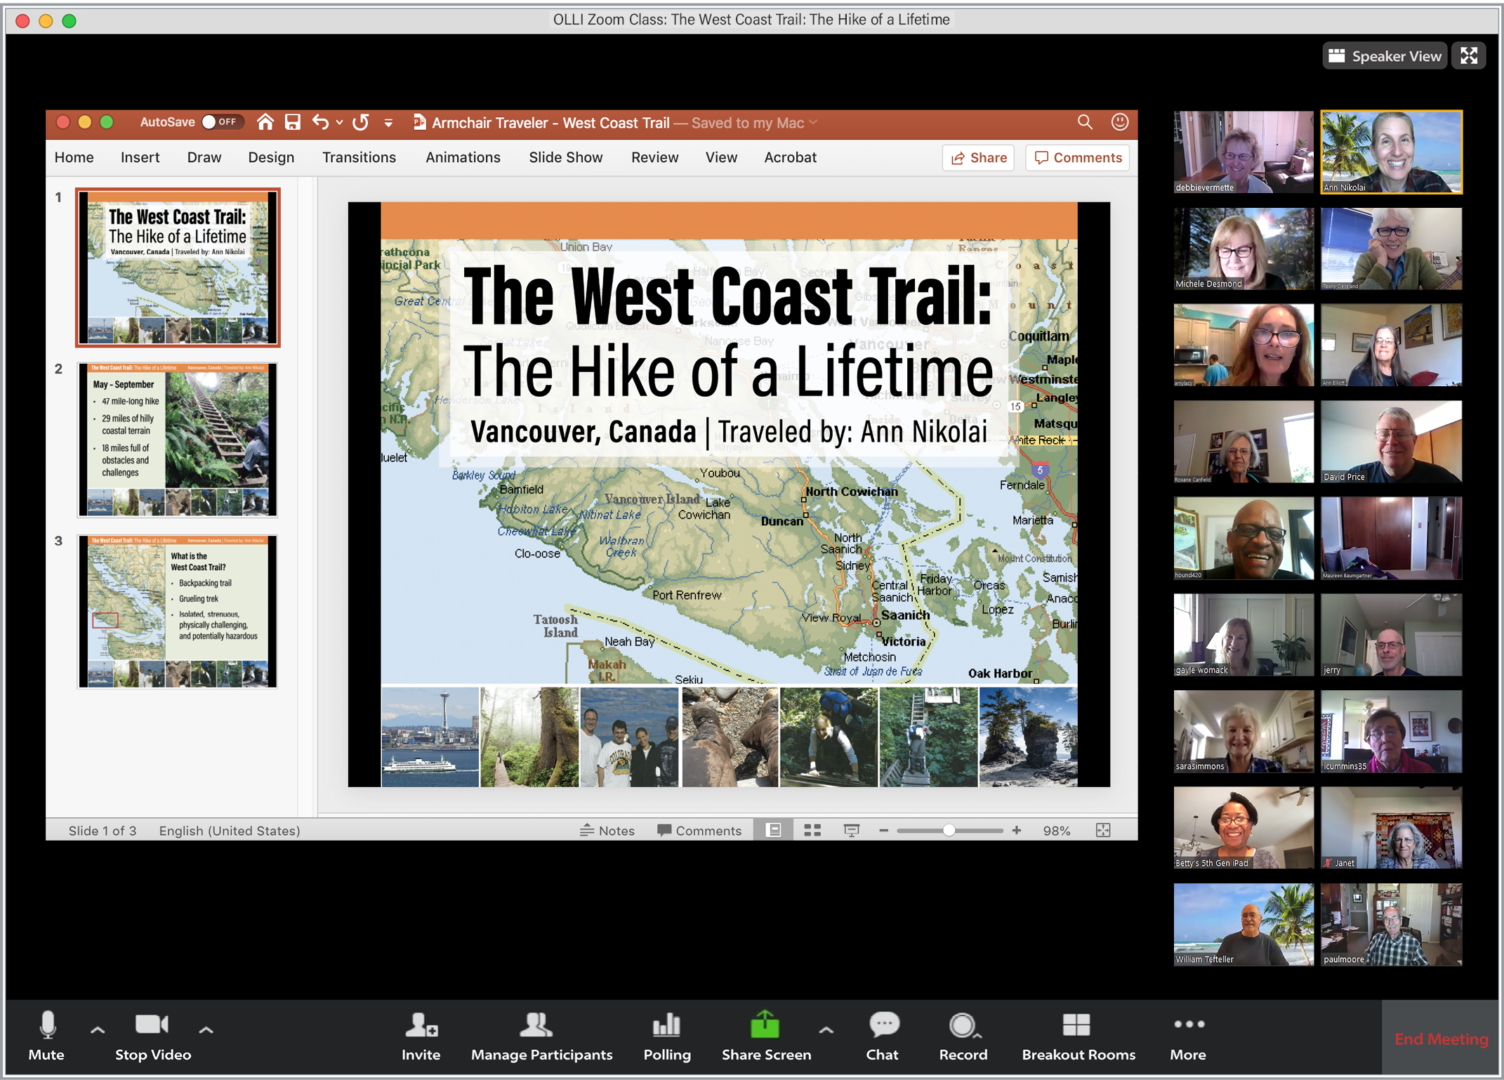 A Zoom screen shows dozens of people participating in a presentation on "The West Coast Trail: The Hike of a Lifetime"